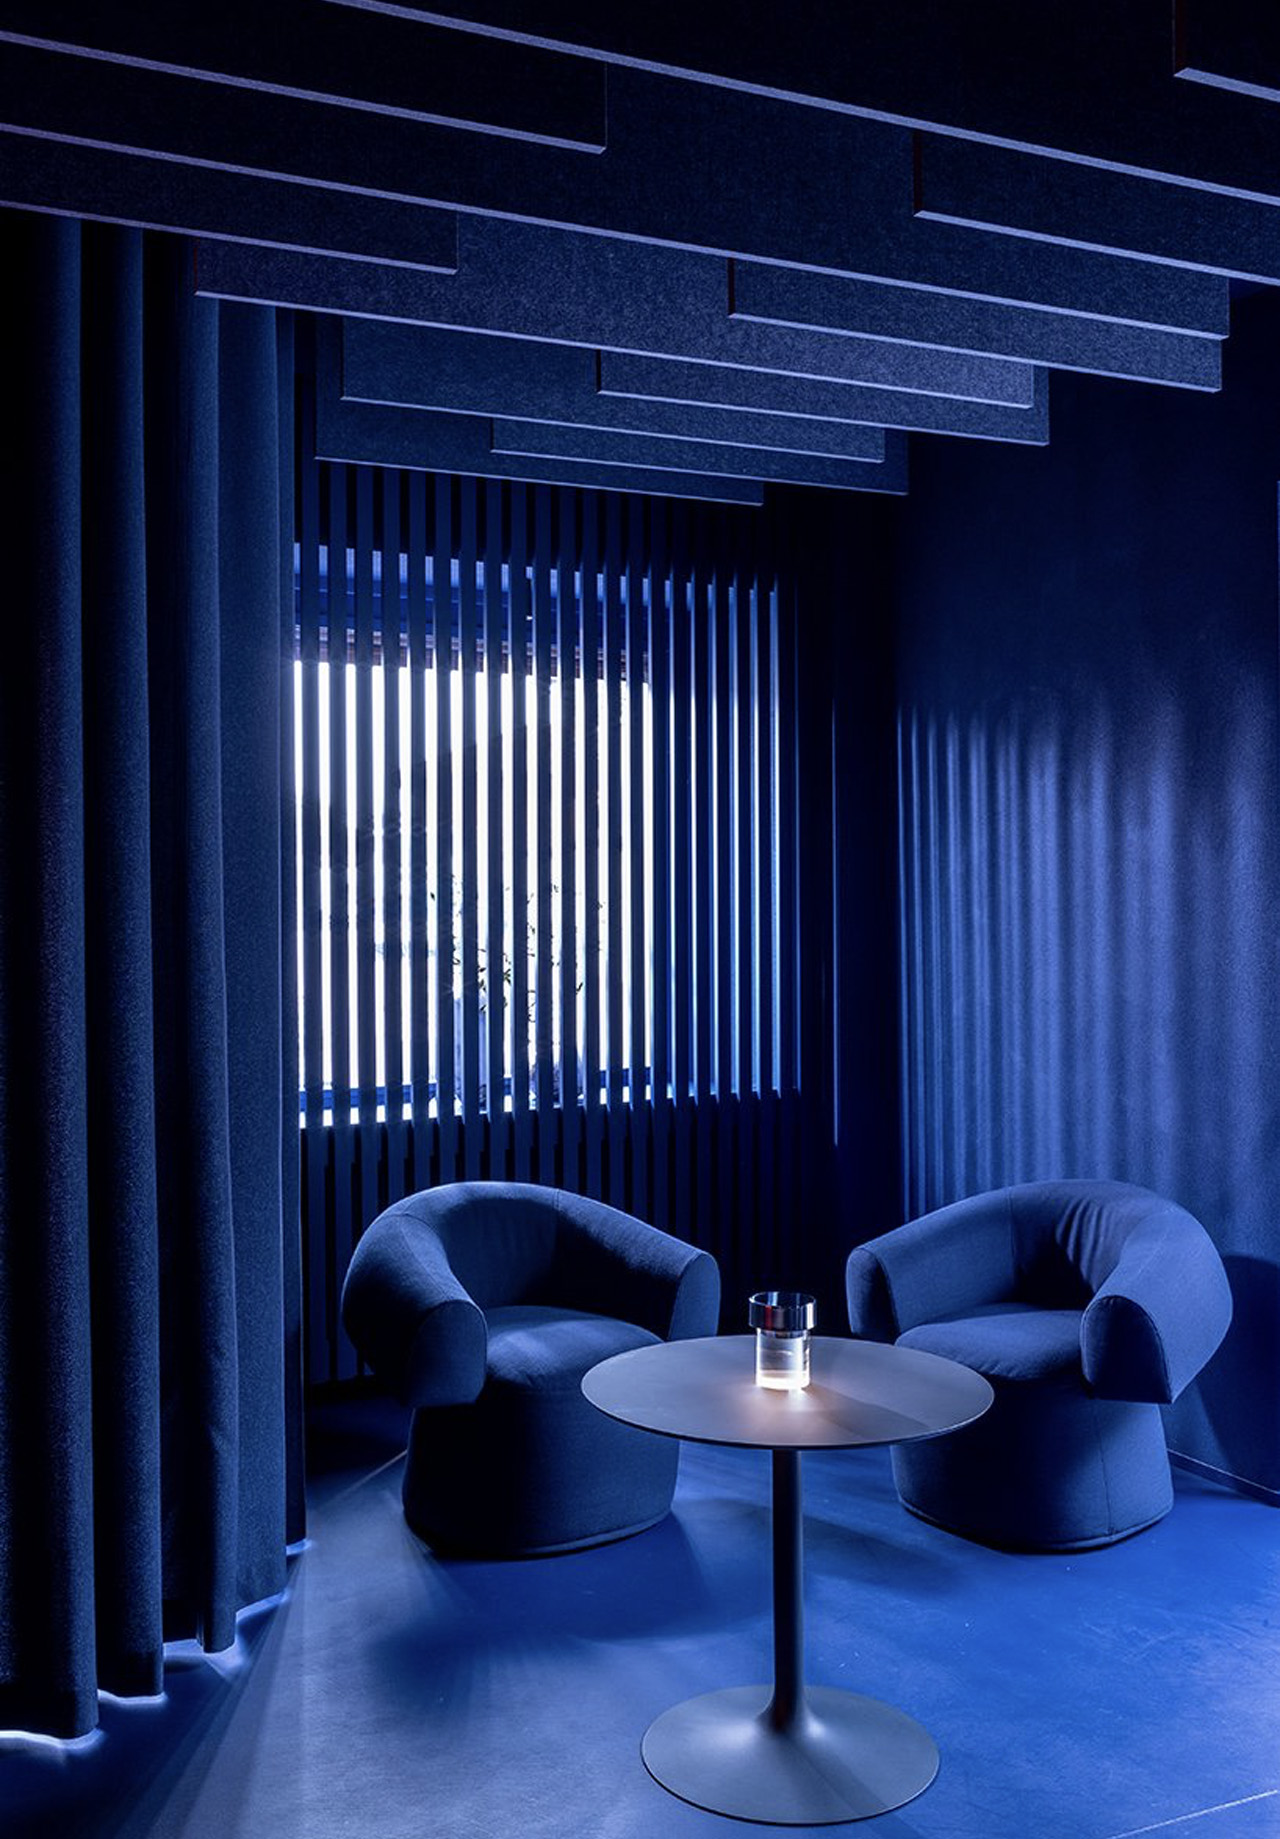 This two Michelin-star restaurant in Italy features a bar lounge immersed in blue and neon orange light